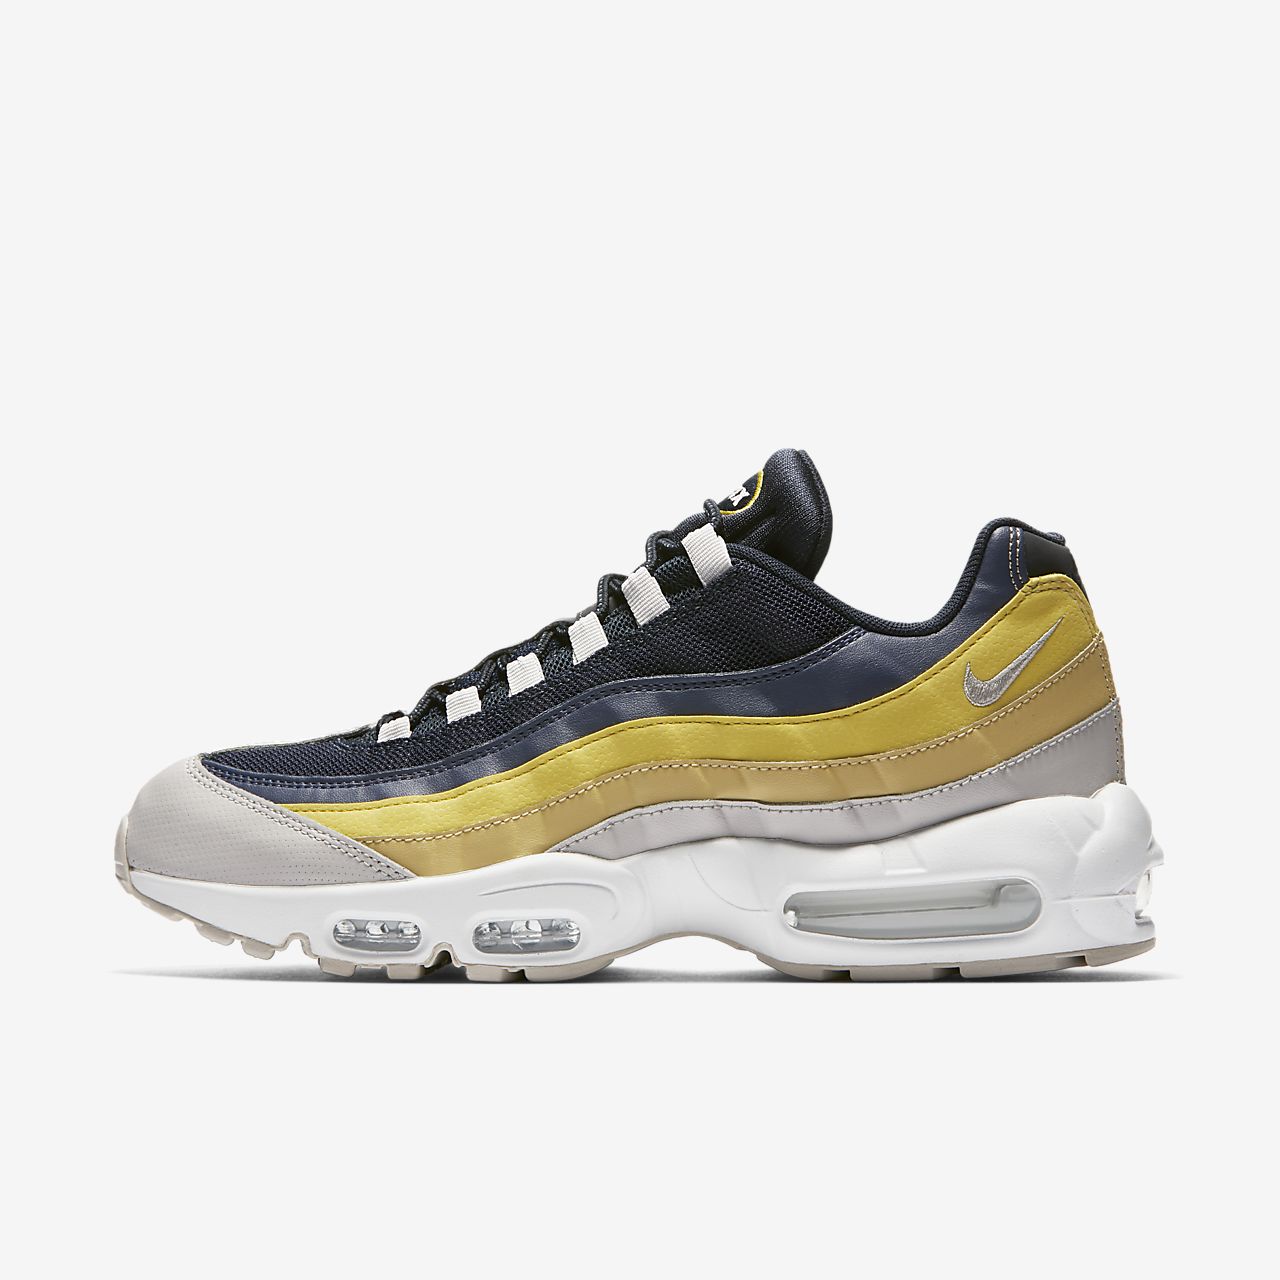 Nike air max 95 – Best with Jeans!